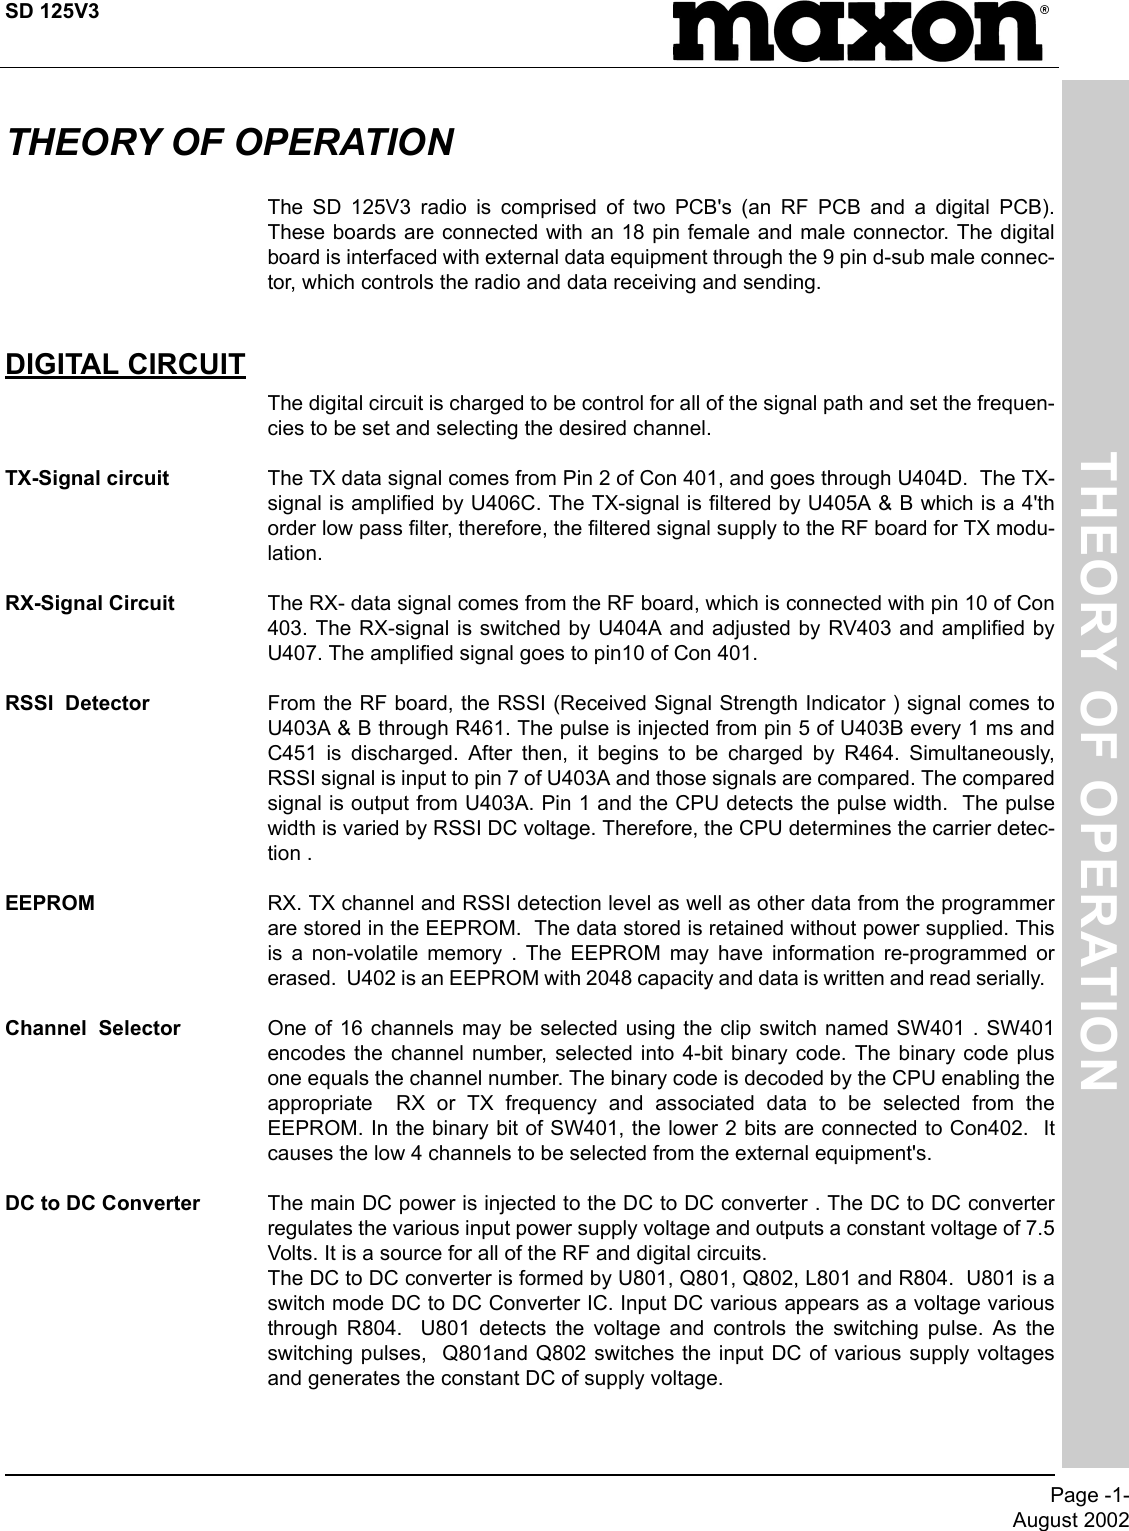 SD 125V3Page -1-August 2002THEORY OF OPERATIONTHEORY OF OPERATIONThe SD 125V3 radio is comprised of two PCB&apos;s (an RF PCB and a digital PCB).These boards are connected with an 18 pin female and male connector. The digitalboard is interfaced with external data equipment through the 9 pin d-sub male connec-tor, which controls the radio and data receiving and sending. DIGITAL CIRCUITThe digital circuit is charged to be control for all of the signal path and set the frequen-cies to be set and selecting the desired channel.TX-Signal circuit  The TX data signal comes from Pin 2 of Con 401, and goes through U404D.  The TX-signal is amplified by U406C. The TX-signal is filtered by U405A &amp; B which is a 4&apos;thorder low pass filter, therefore, the filtered signal supply to the RF board for TX modu-lation.RX-Signal Circuit The RX- data signal comes from the RF board, which is connected with pin 10 of Con403. The RX-signal is switched by U404A and adjusted by RV403 and amplified byU407. The amplified signal goes to pin10 of Con 401.RSSI  Detector From the RF board, the RSSI (Received Signal Strength Indicator ) signal comes toU403A &amp; B through R461. The pulse is injected from pin 5 of U403B every 1 ms andC451 is discharged. After then, it begins to be charged by R464. Simultaneously,RSSI signal is input to pin 7 of U403A and those signals are compared. The comparedsignal is output from U403A. Pin 1 and the CPU detects the pulse width.  The pulsewidth is varied by RSSI DC voltage. Therefore, the CPU determines the carrier detec-tion .EEPROM RX. TX channel and RSSI detection level as well as other data from the programmerare stored in the EEPROM.  The data stored is retained without power supplied. Thisis a non-volatile memory . The EEPROM may have information re-programmed orerased.  U402 is an EEPROM with 2048 capacity and data is written and read serially.  Channel  Selector One of 16 channels may be selected using the clip switch named SW401 . SW401encodes the channel number, selected into 4-bit binary code. The binary code plusone equals the channel number. The binary code is decoded by the CPU enabling theappropriate  RX or TX frequency and associated data to be selected from theEEPROM. In the binary bit of SW401, the lower 2 bits are connected to Con402.  Itcauses the low 4 channels to be selected from the external equipment&apos;s.DC to DC Converter The main DC power is injected to the DC to DC converter . The DC to DC converterregulates the various input power supply voltage and outputs a constant voltage of 7.5Volts. It is a source for all of the RF and digital circuits.The DC to DC converter is formed by U801, Q801, Q802, L801 and R804.  U801 is aswitch mode DC to DC Converter IC. Input DC various appears as a voltage variousthrough R804.  U801 detects the voltage and controls the switching pulse. As theswitching pulses,  Q801and Q802 switches the input DC of various supply voltagesand generates the constant DC of supply voltage.